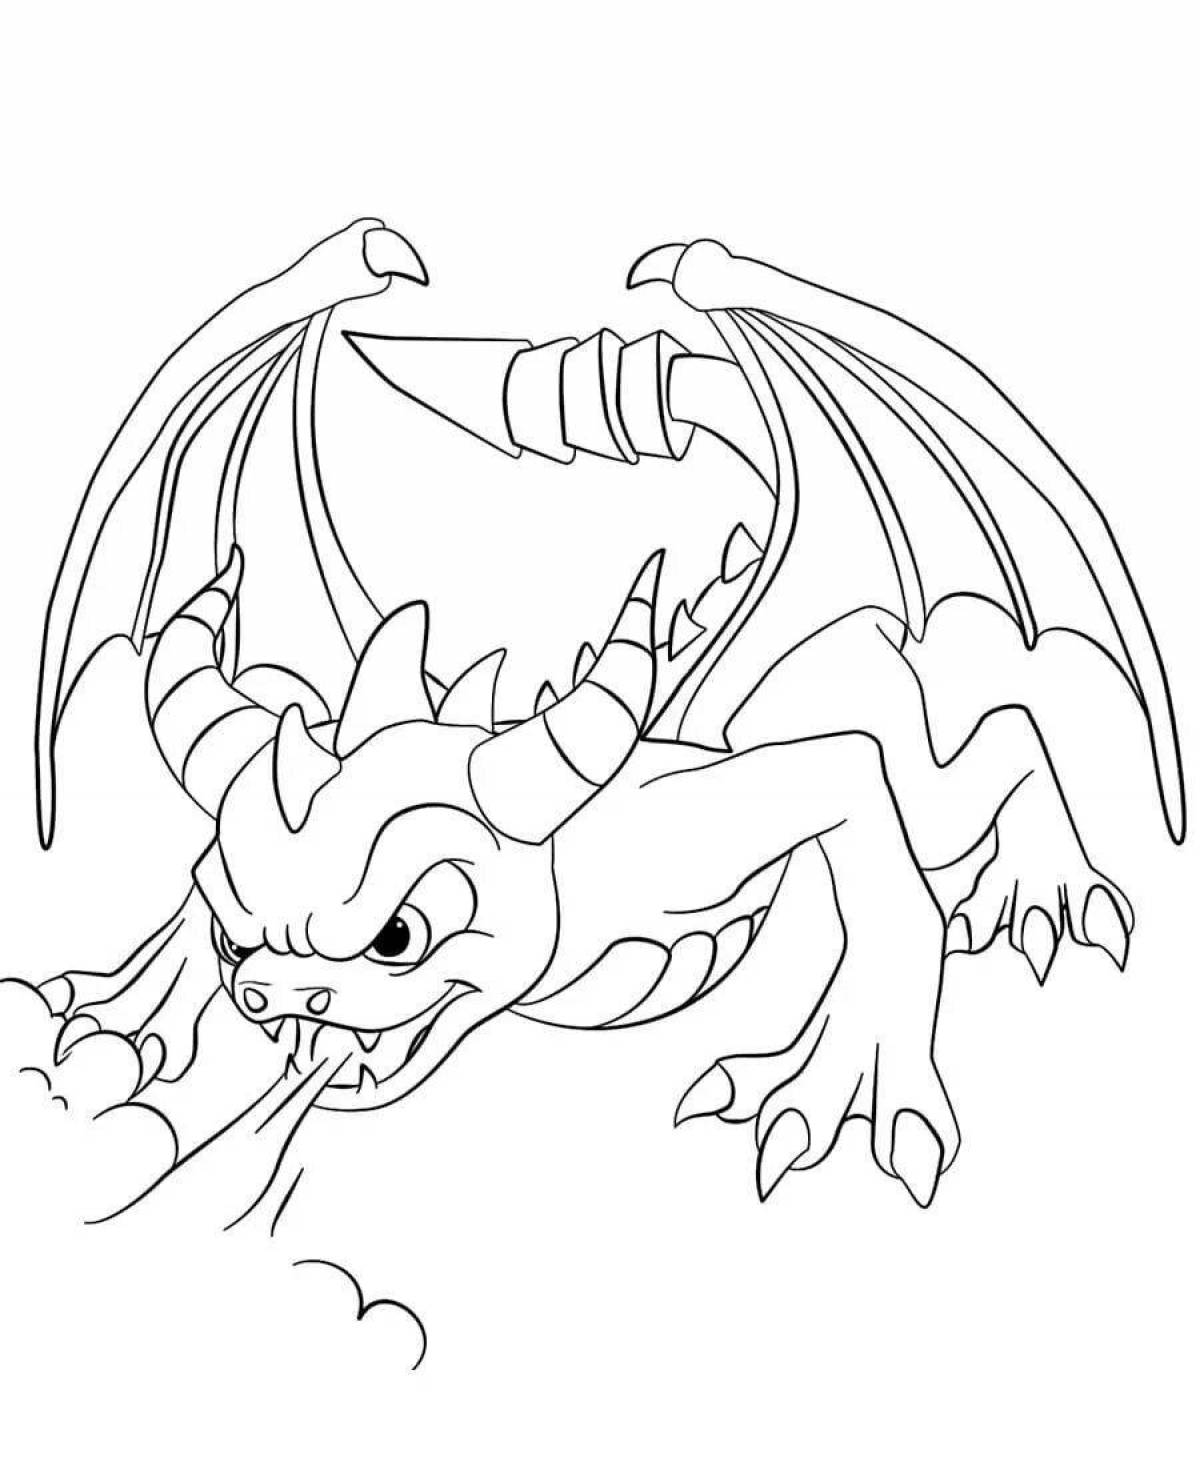 Iniquitous coloring dragon angry